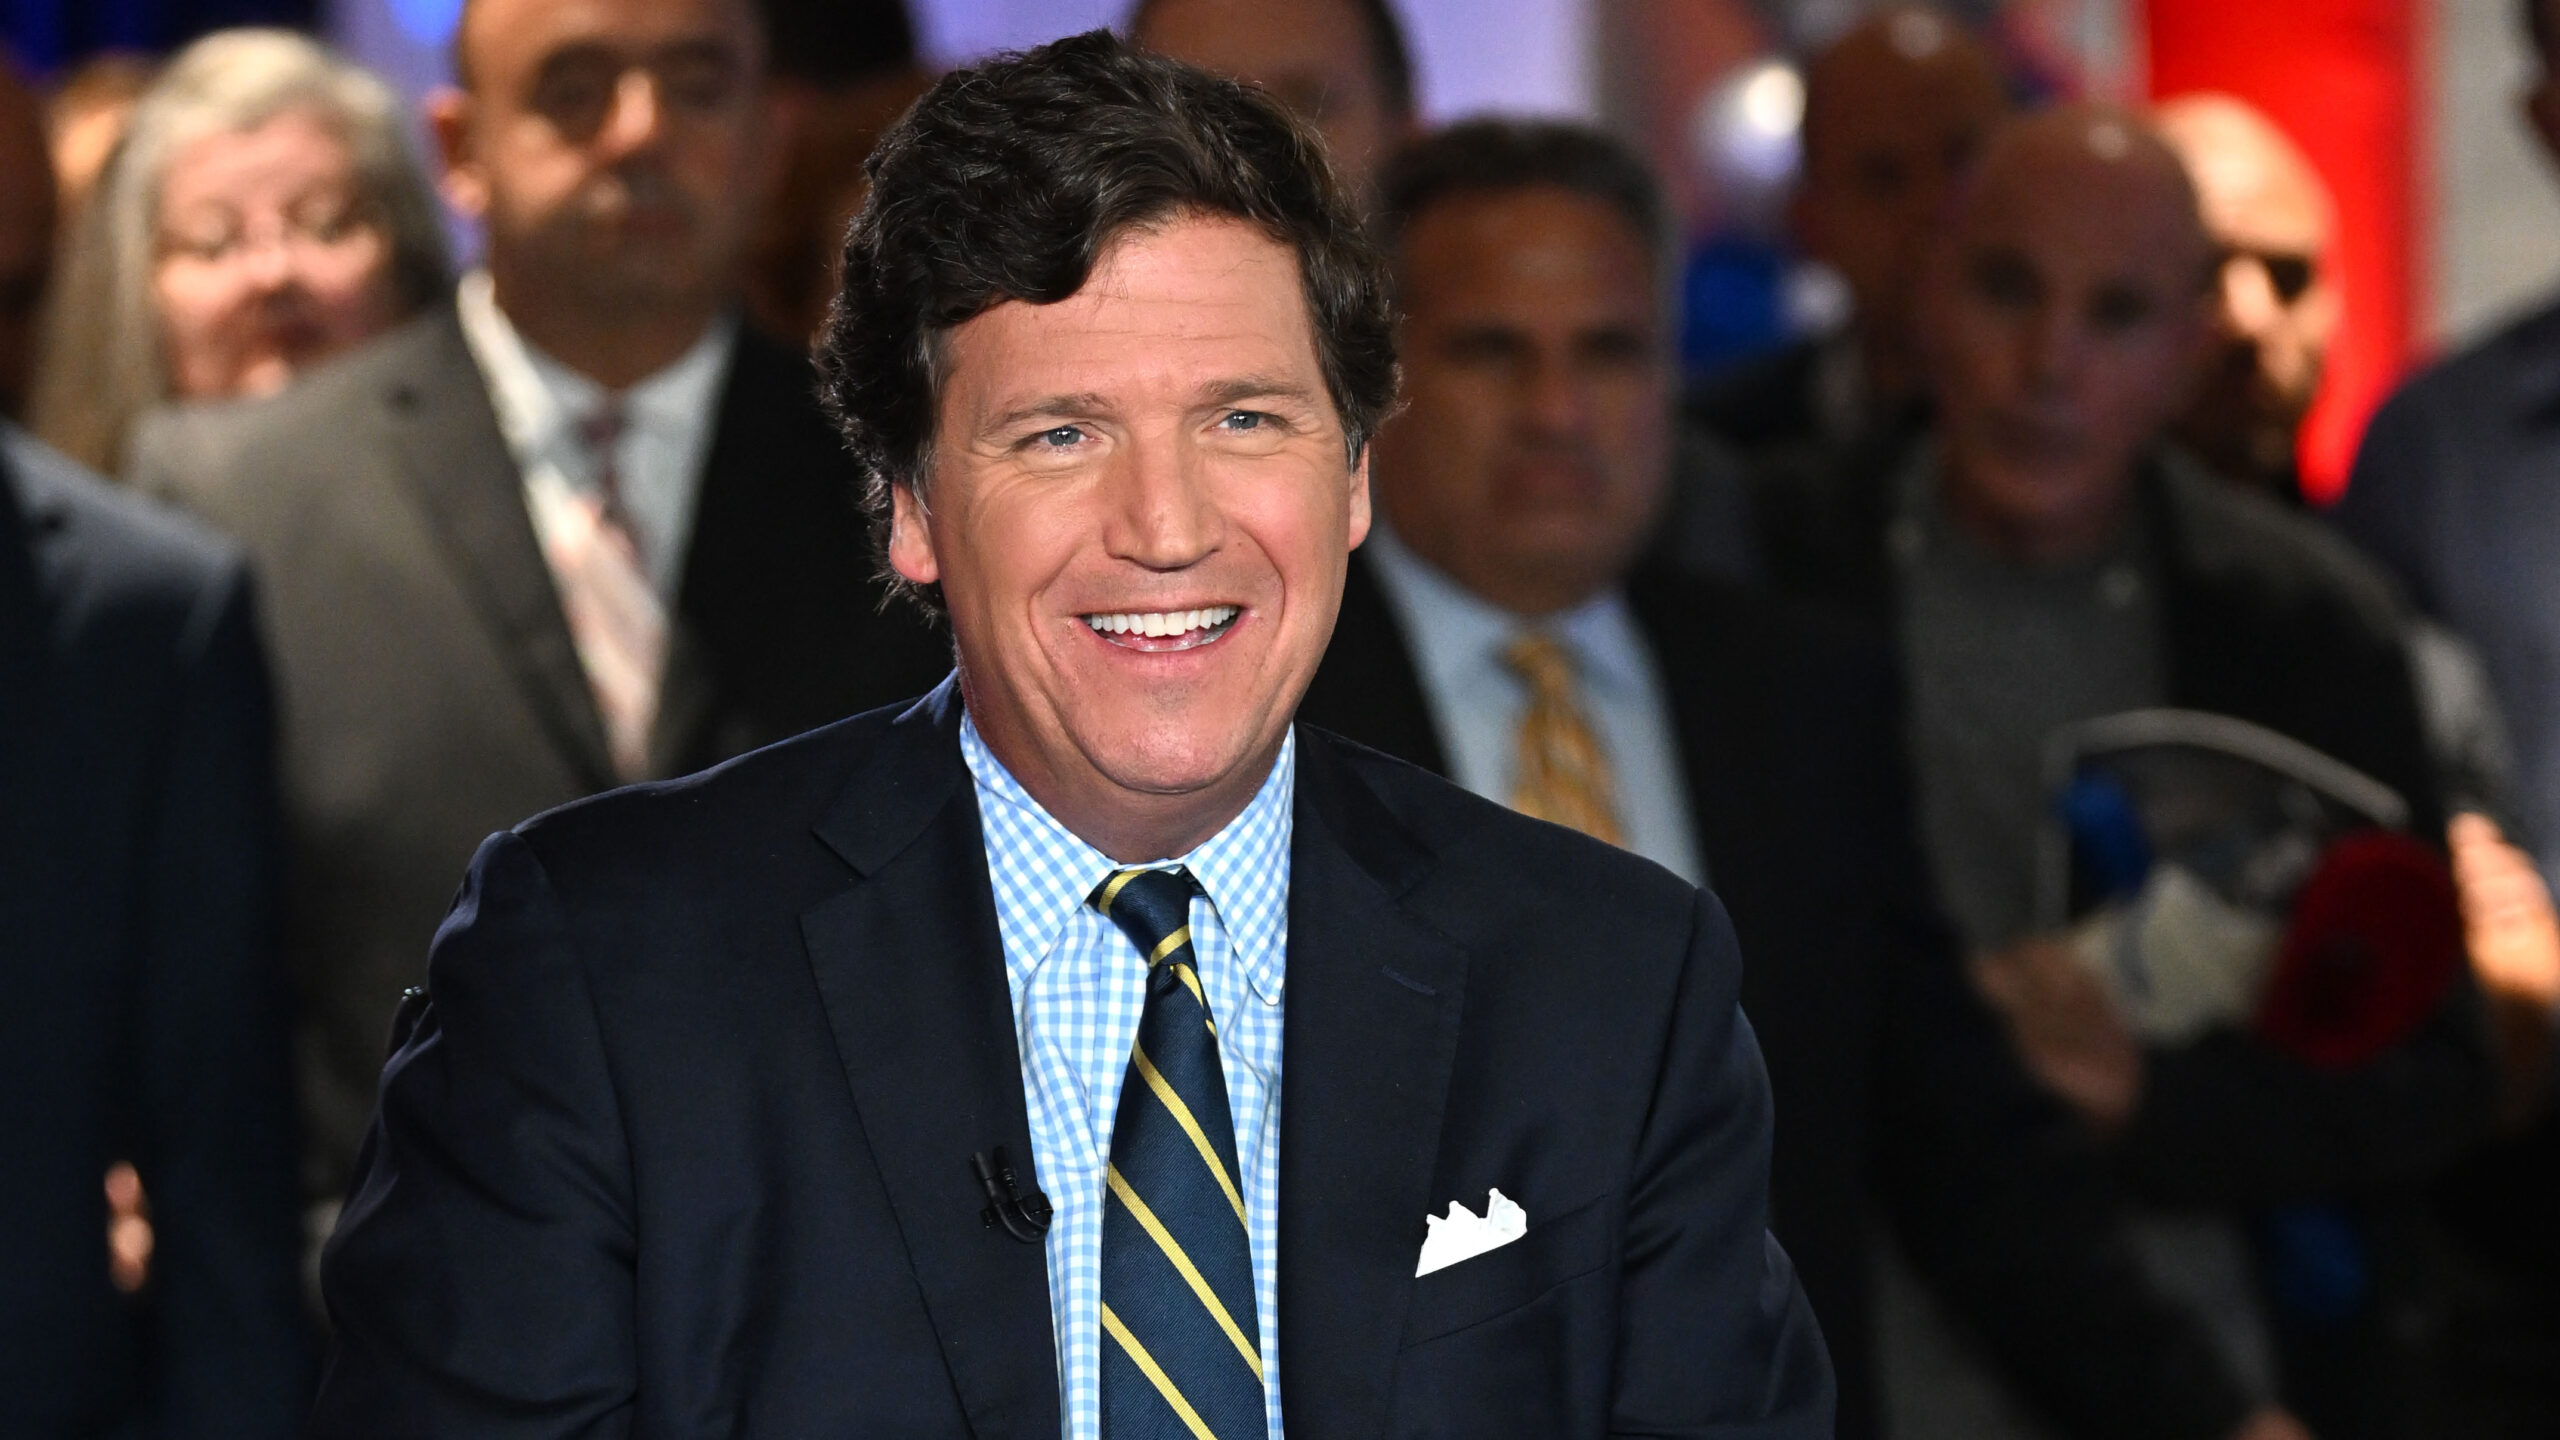 Tucker Carlson accuses Fox News of fraud and breaking contract.